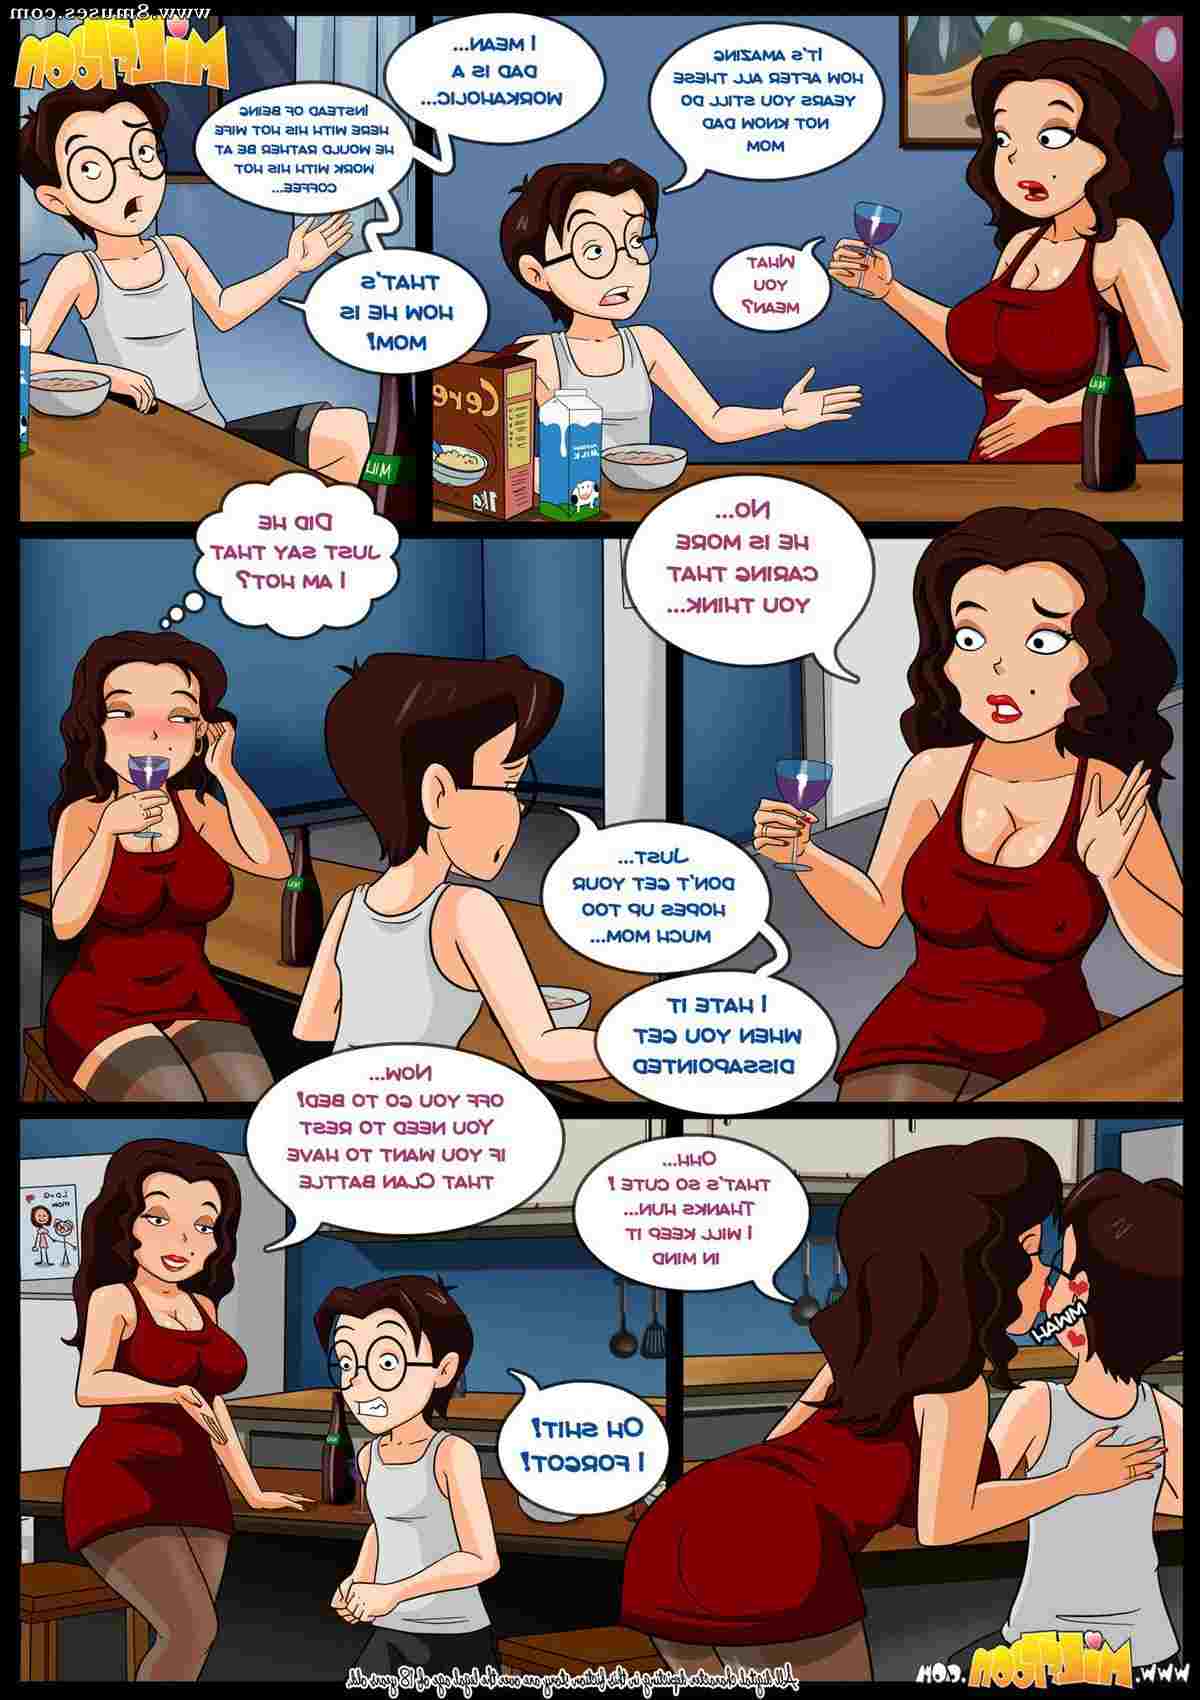 MilfToon-Comics/Wine-and-Dine Wine_and_Dine__8muses_-_Sex_and_Porn_Comics_7.jpg